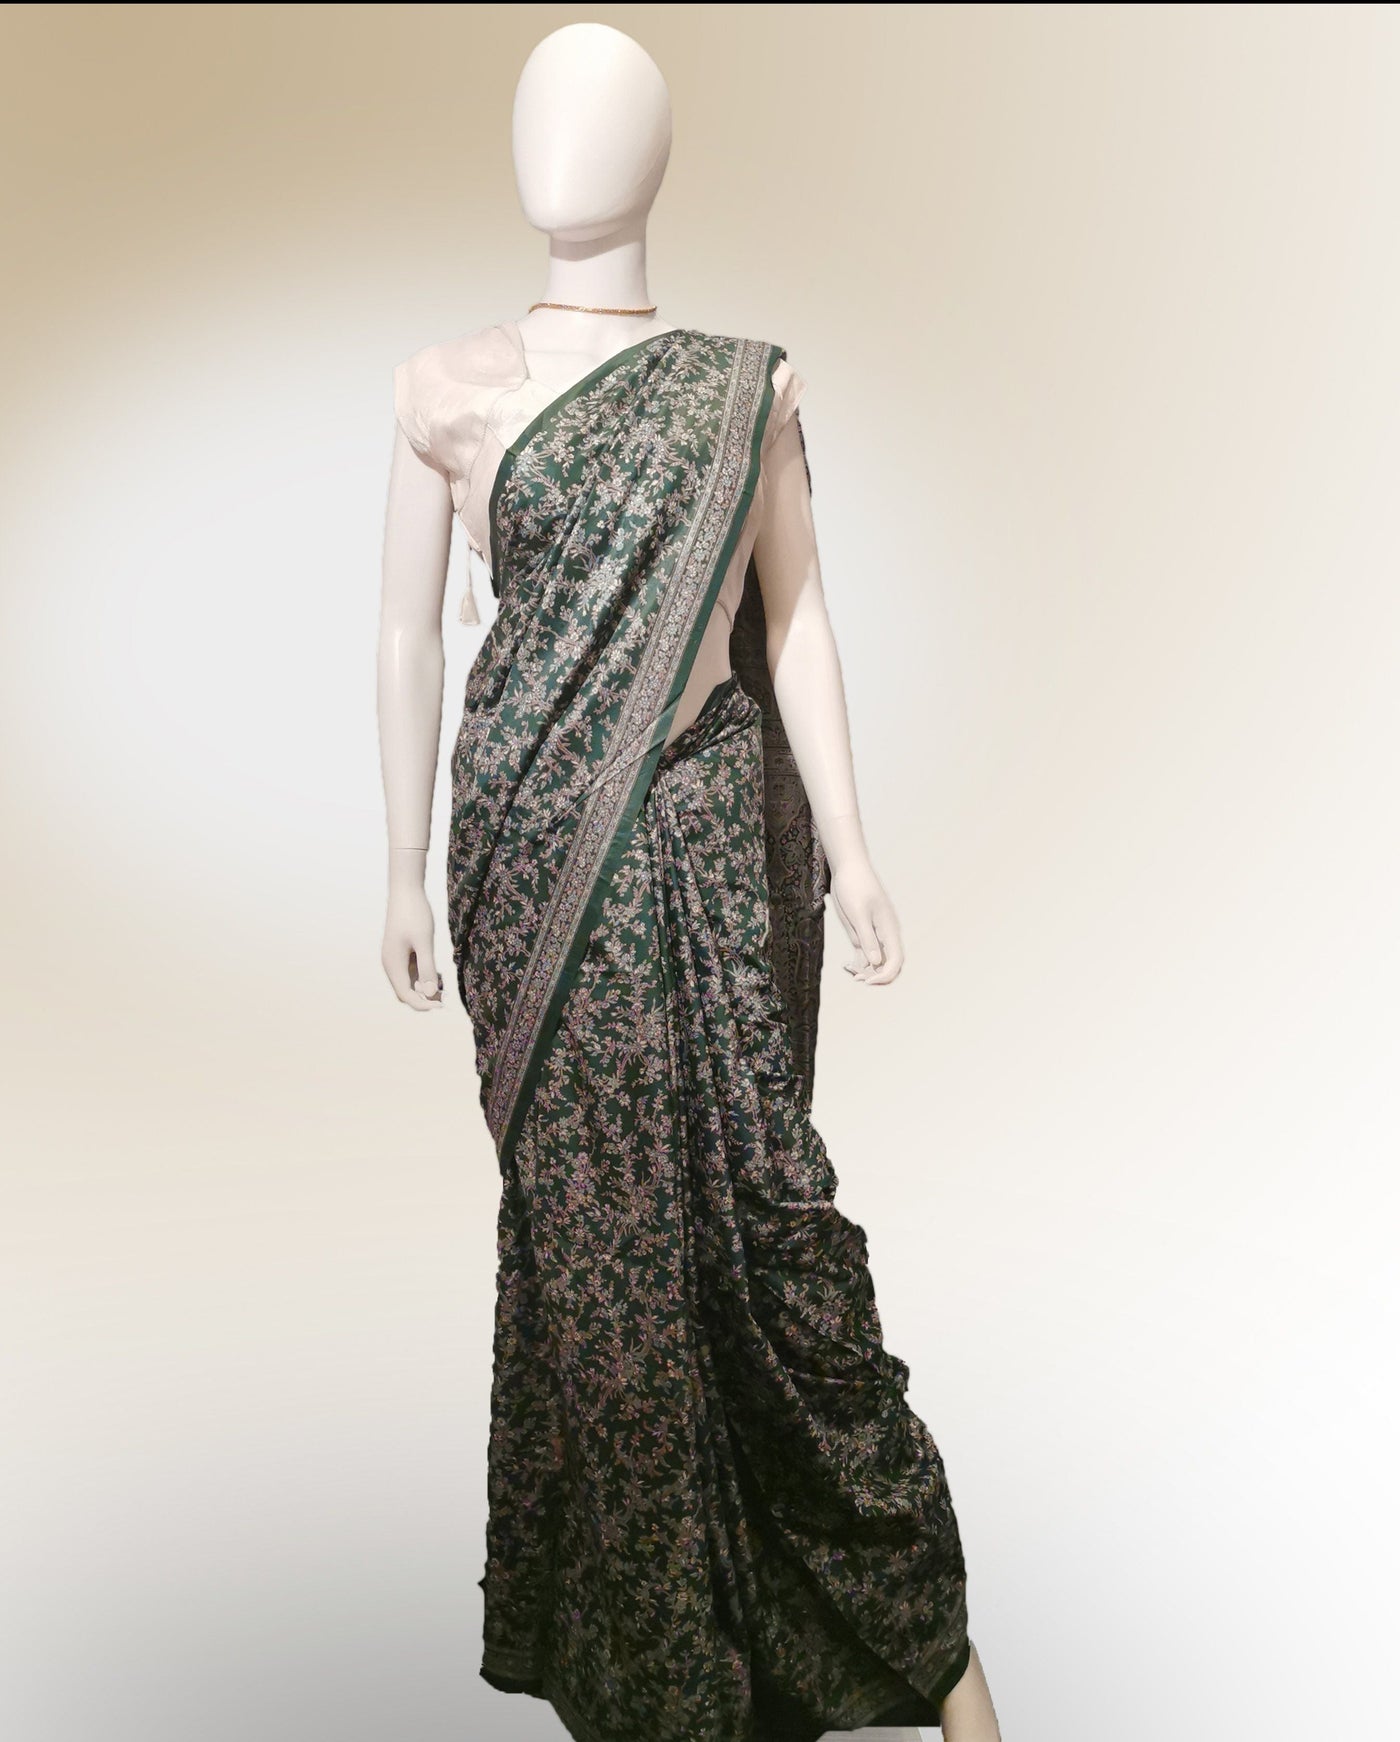 Saree in Green and Pink Featured in Traditional Style Print Indian Clothing in Denver, CO, Aurora, CO, Boulder, CO, Fort Collins, CO, Colorado Springs, CO, Parker, CO, Highlands Ranch, CO, Cherry Creek, CO, Centennial, CO, and Longmont, CO. NATIONWIDE SHIPPING USA- India Fashion X